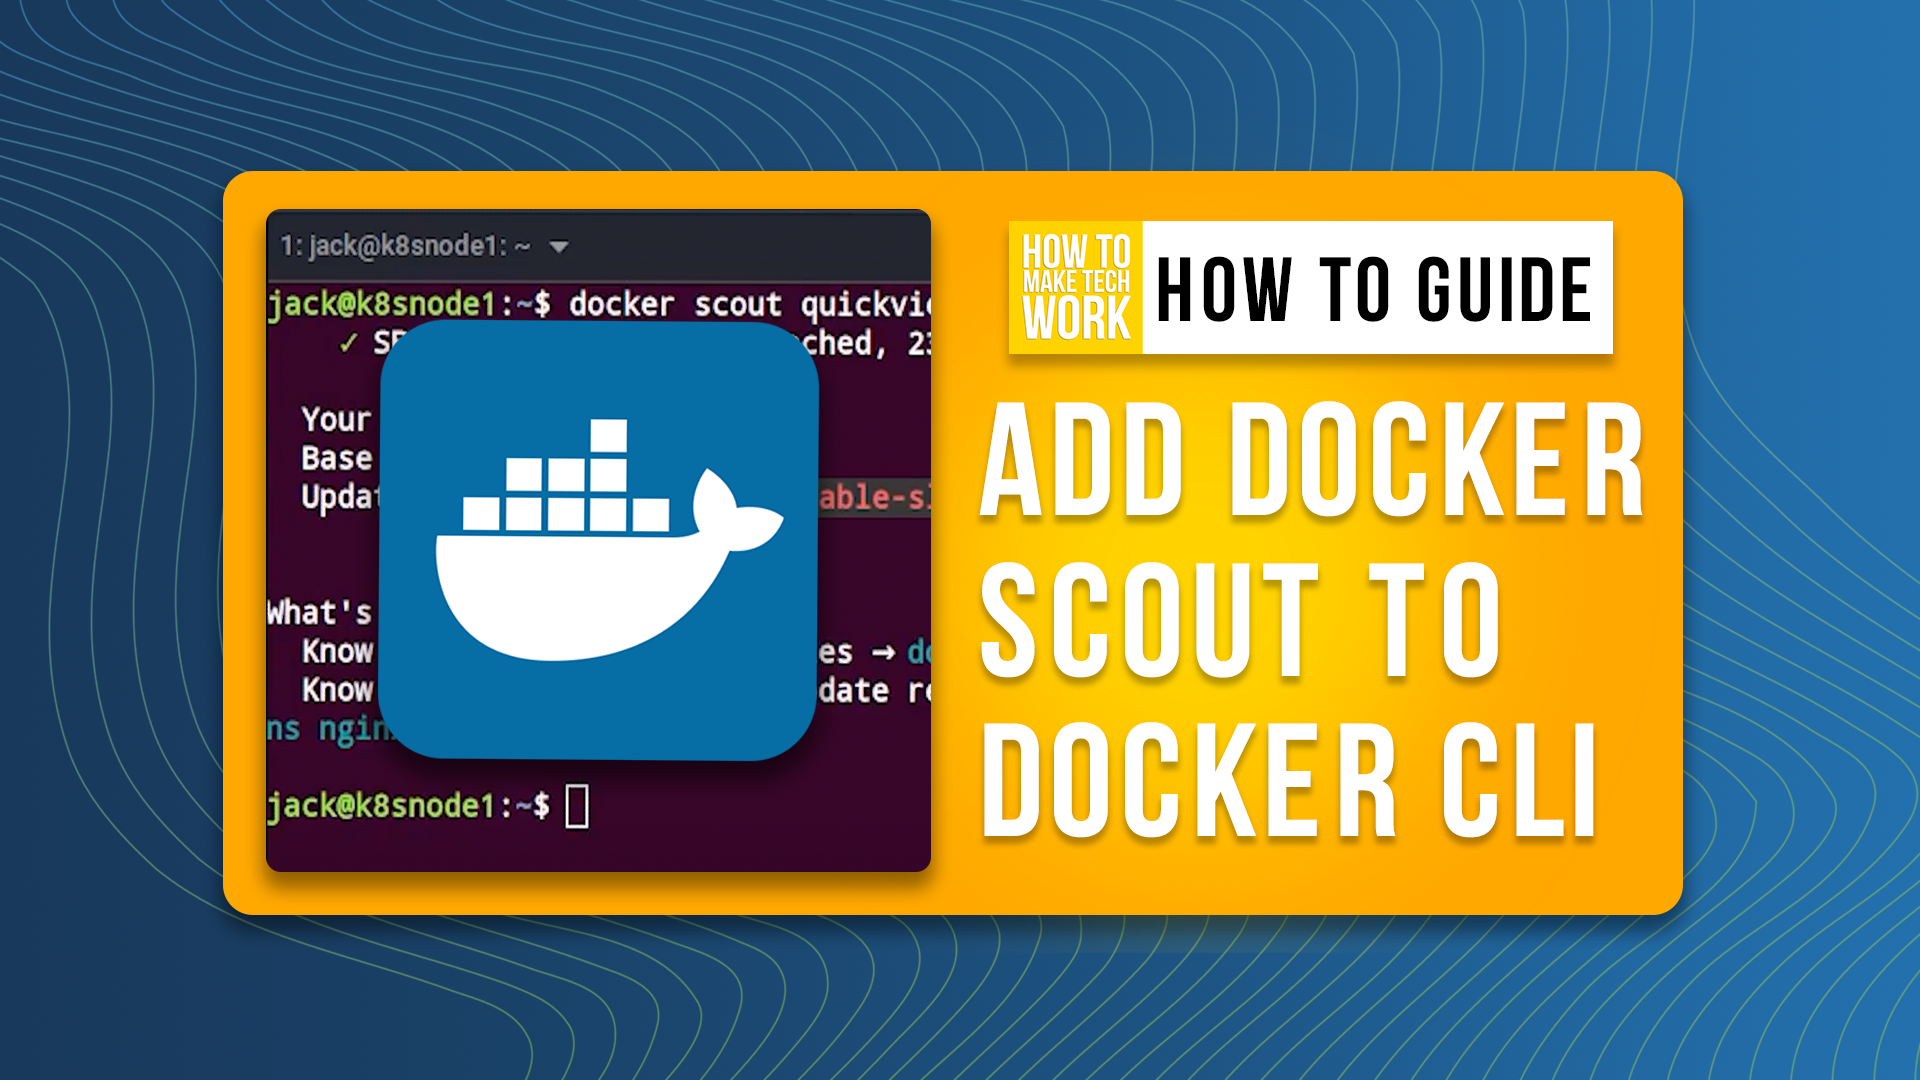 How to Add the Docker Scout Feature to the Docker CLI